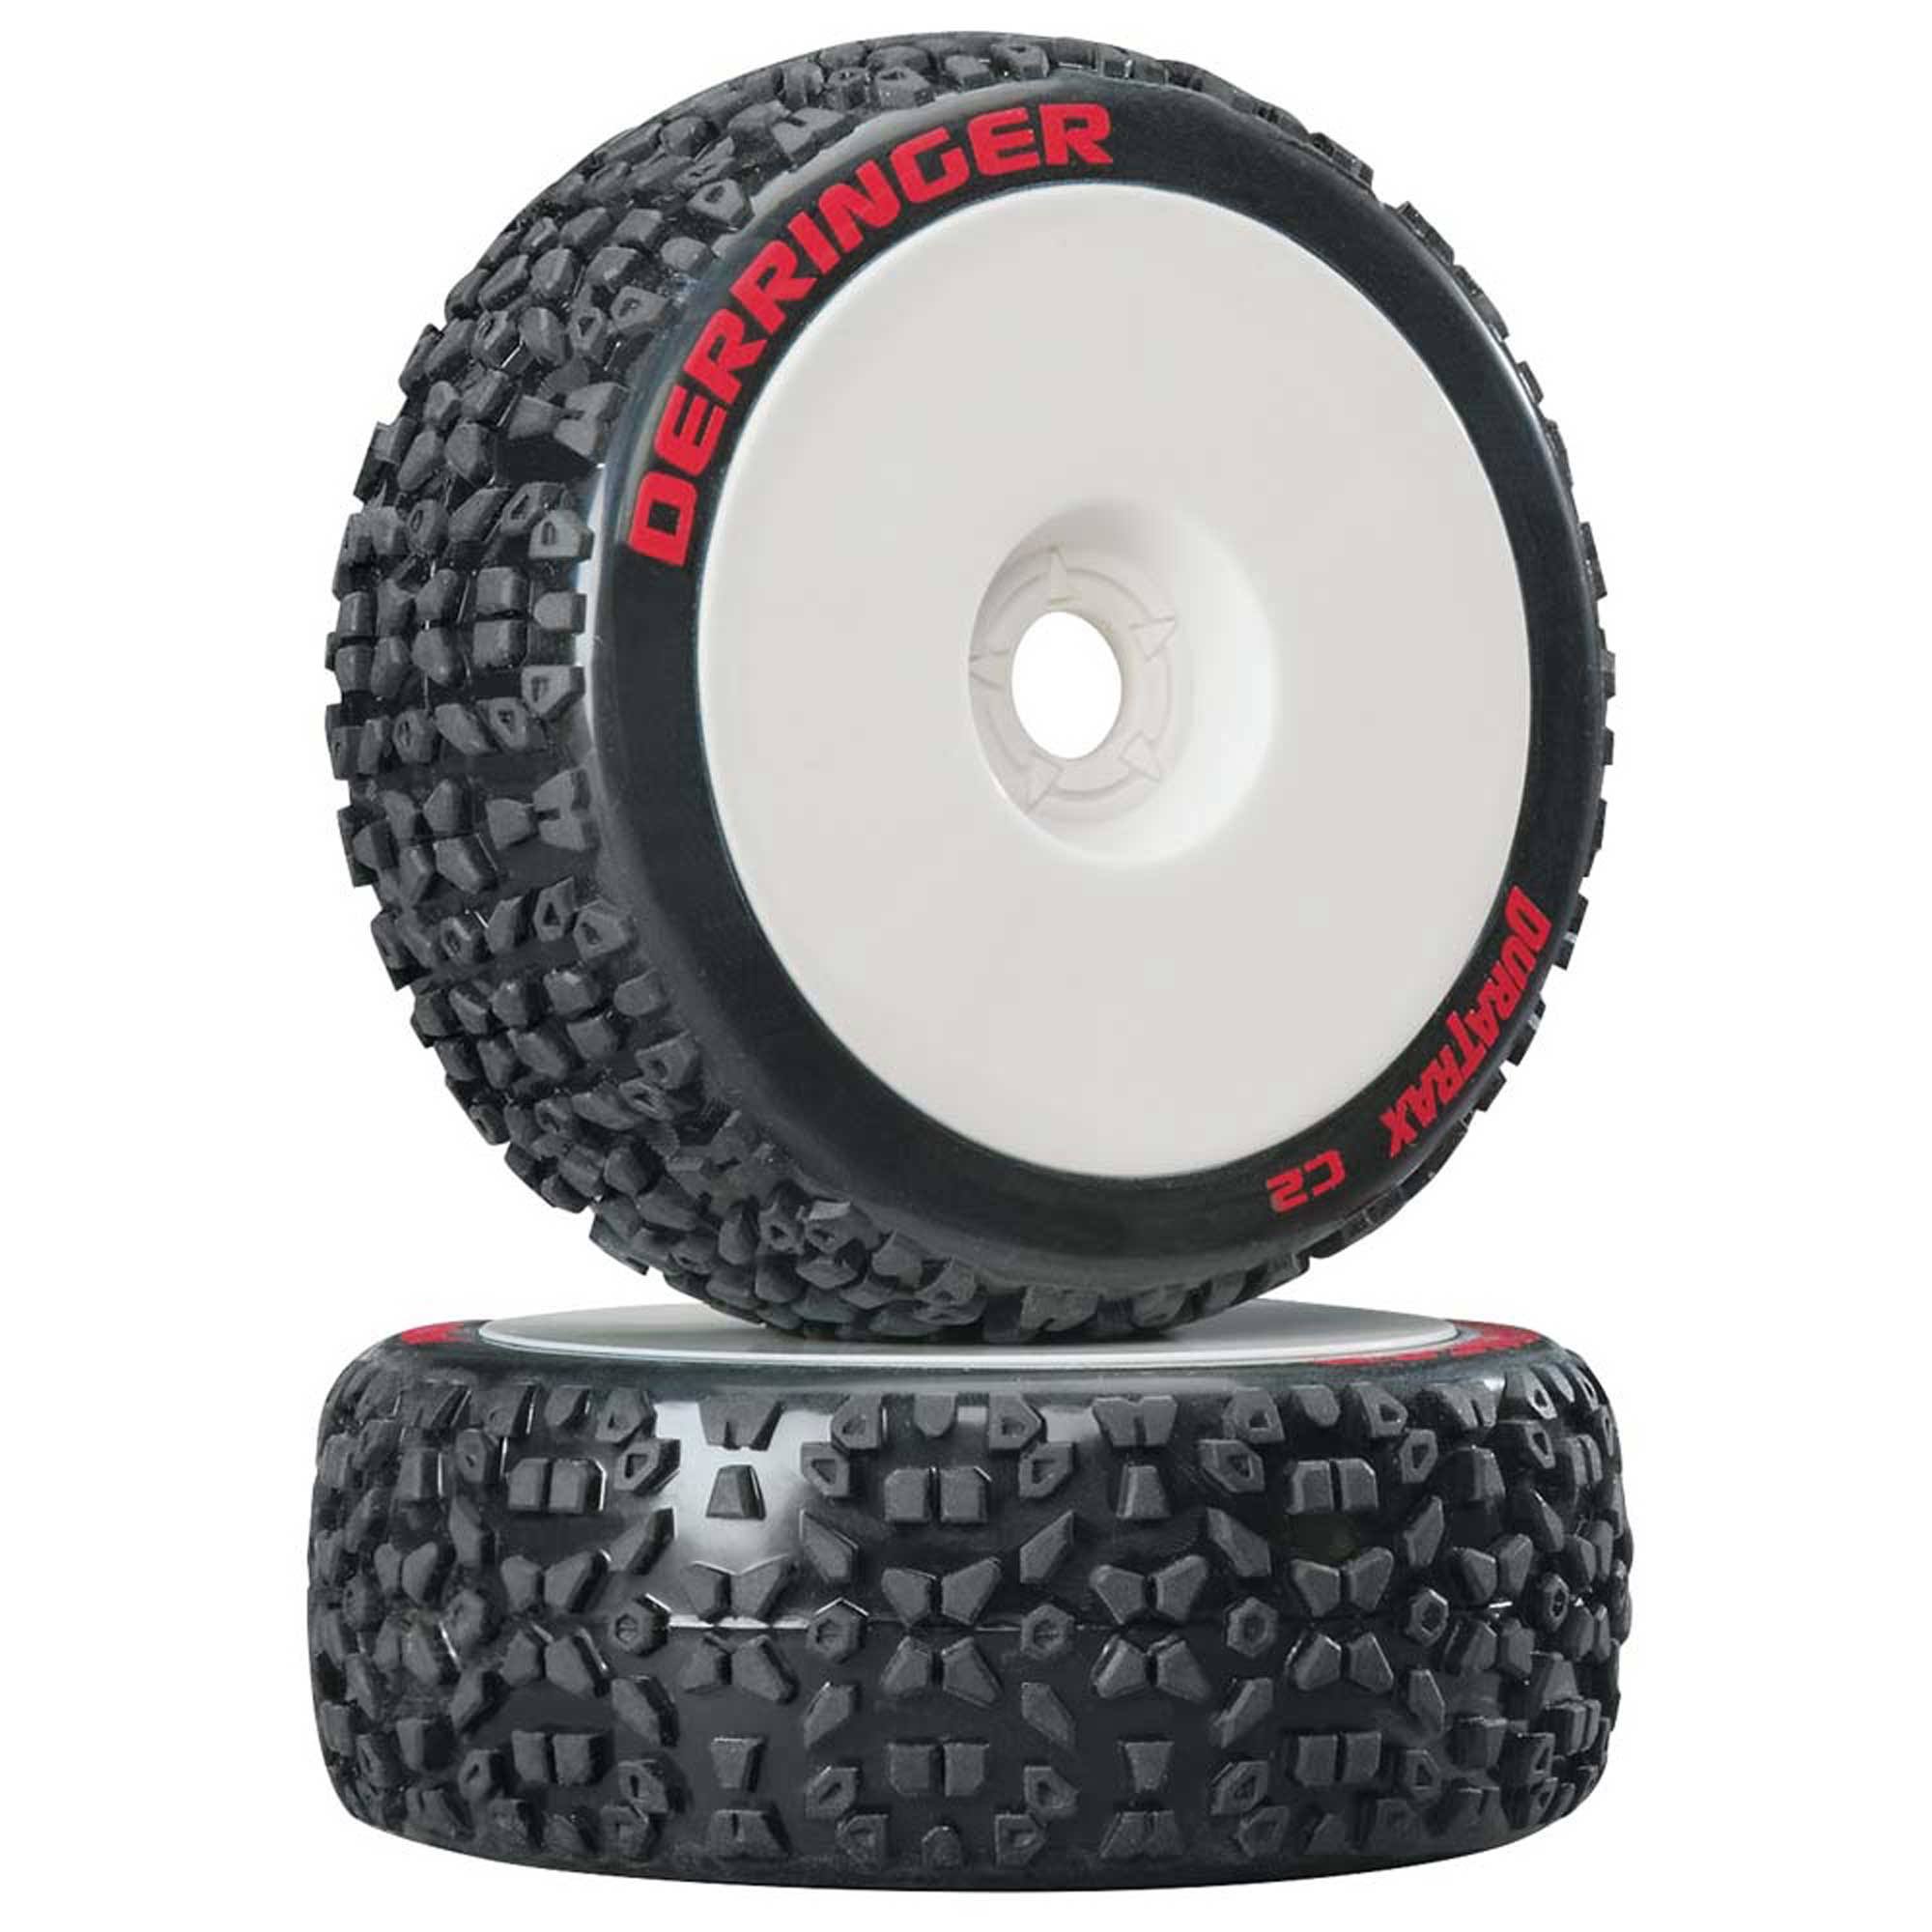 Duratrax DTXC3635 Derringer C2 Mounted Buggy Tire - White, 2ct, 1/8